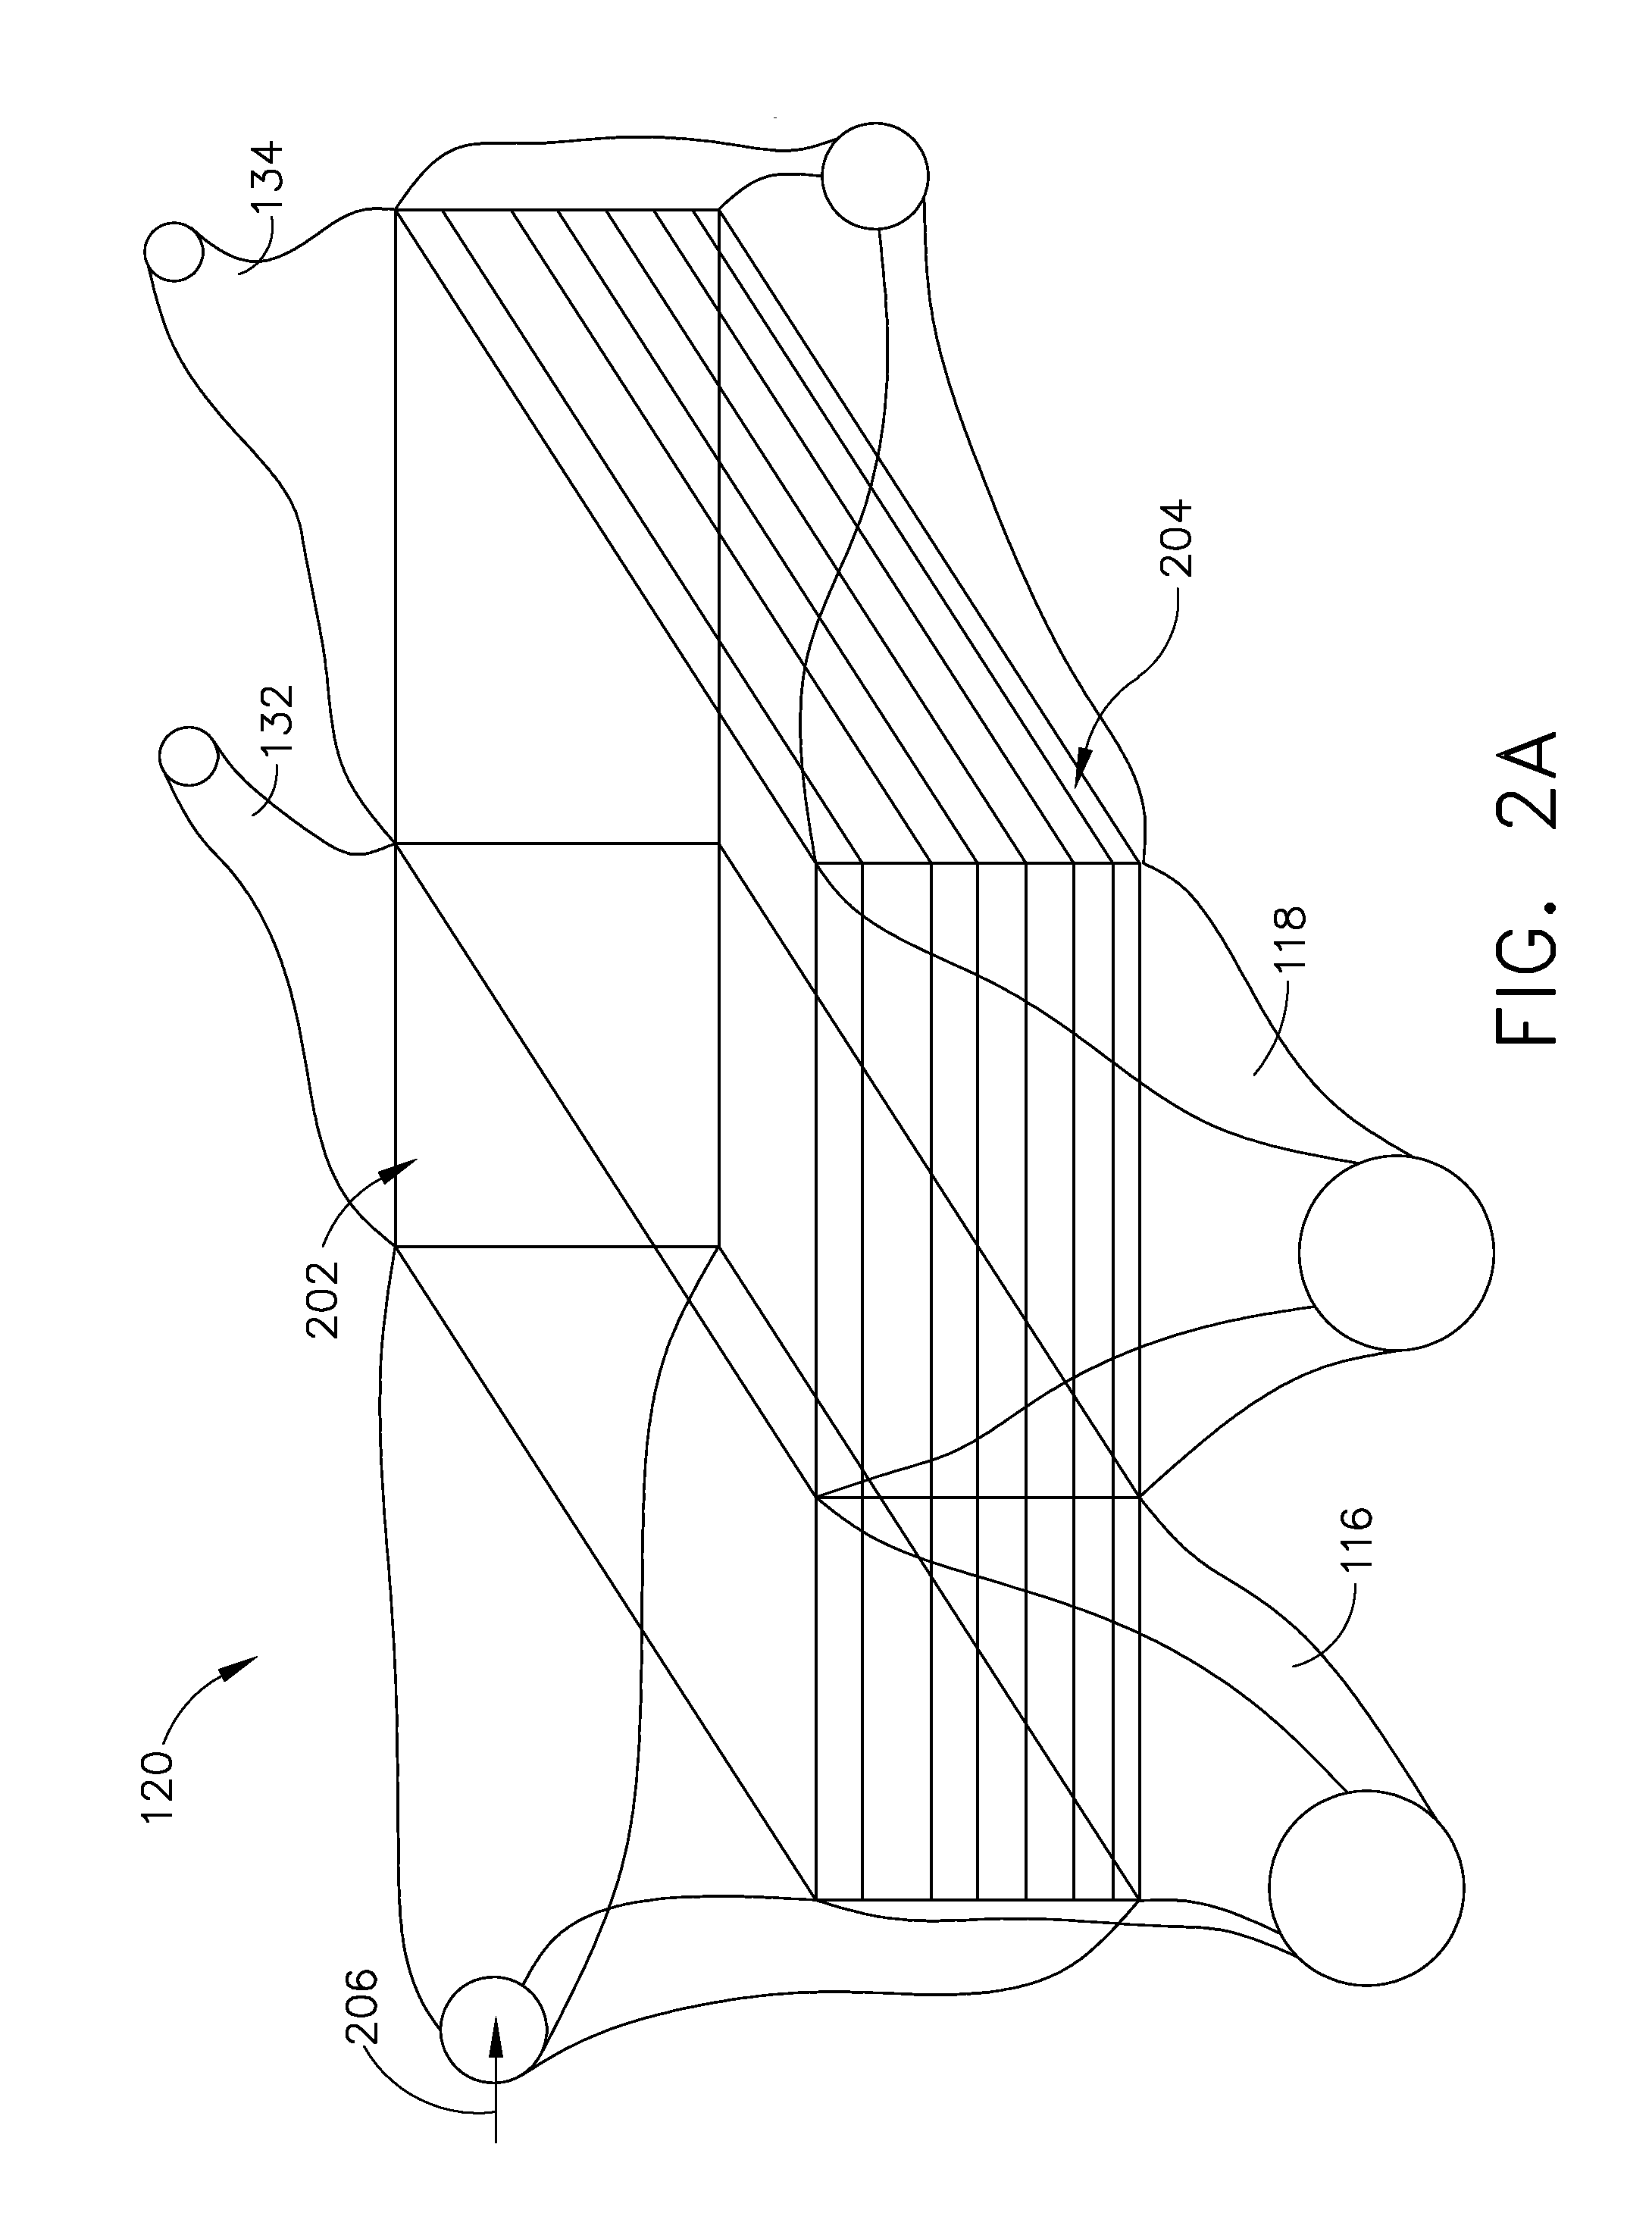 Bleed air and hot section component cooling air system and method